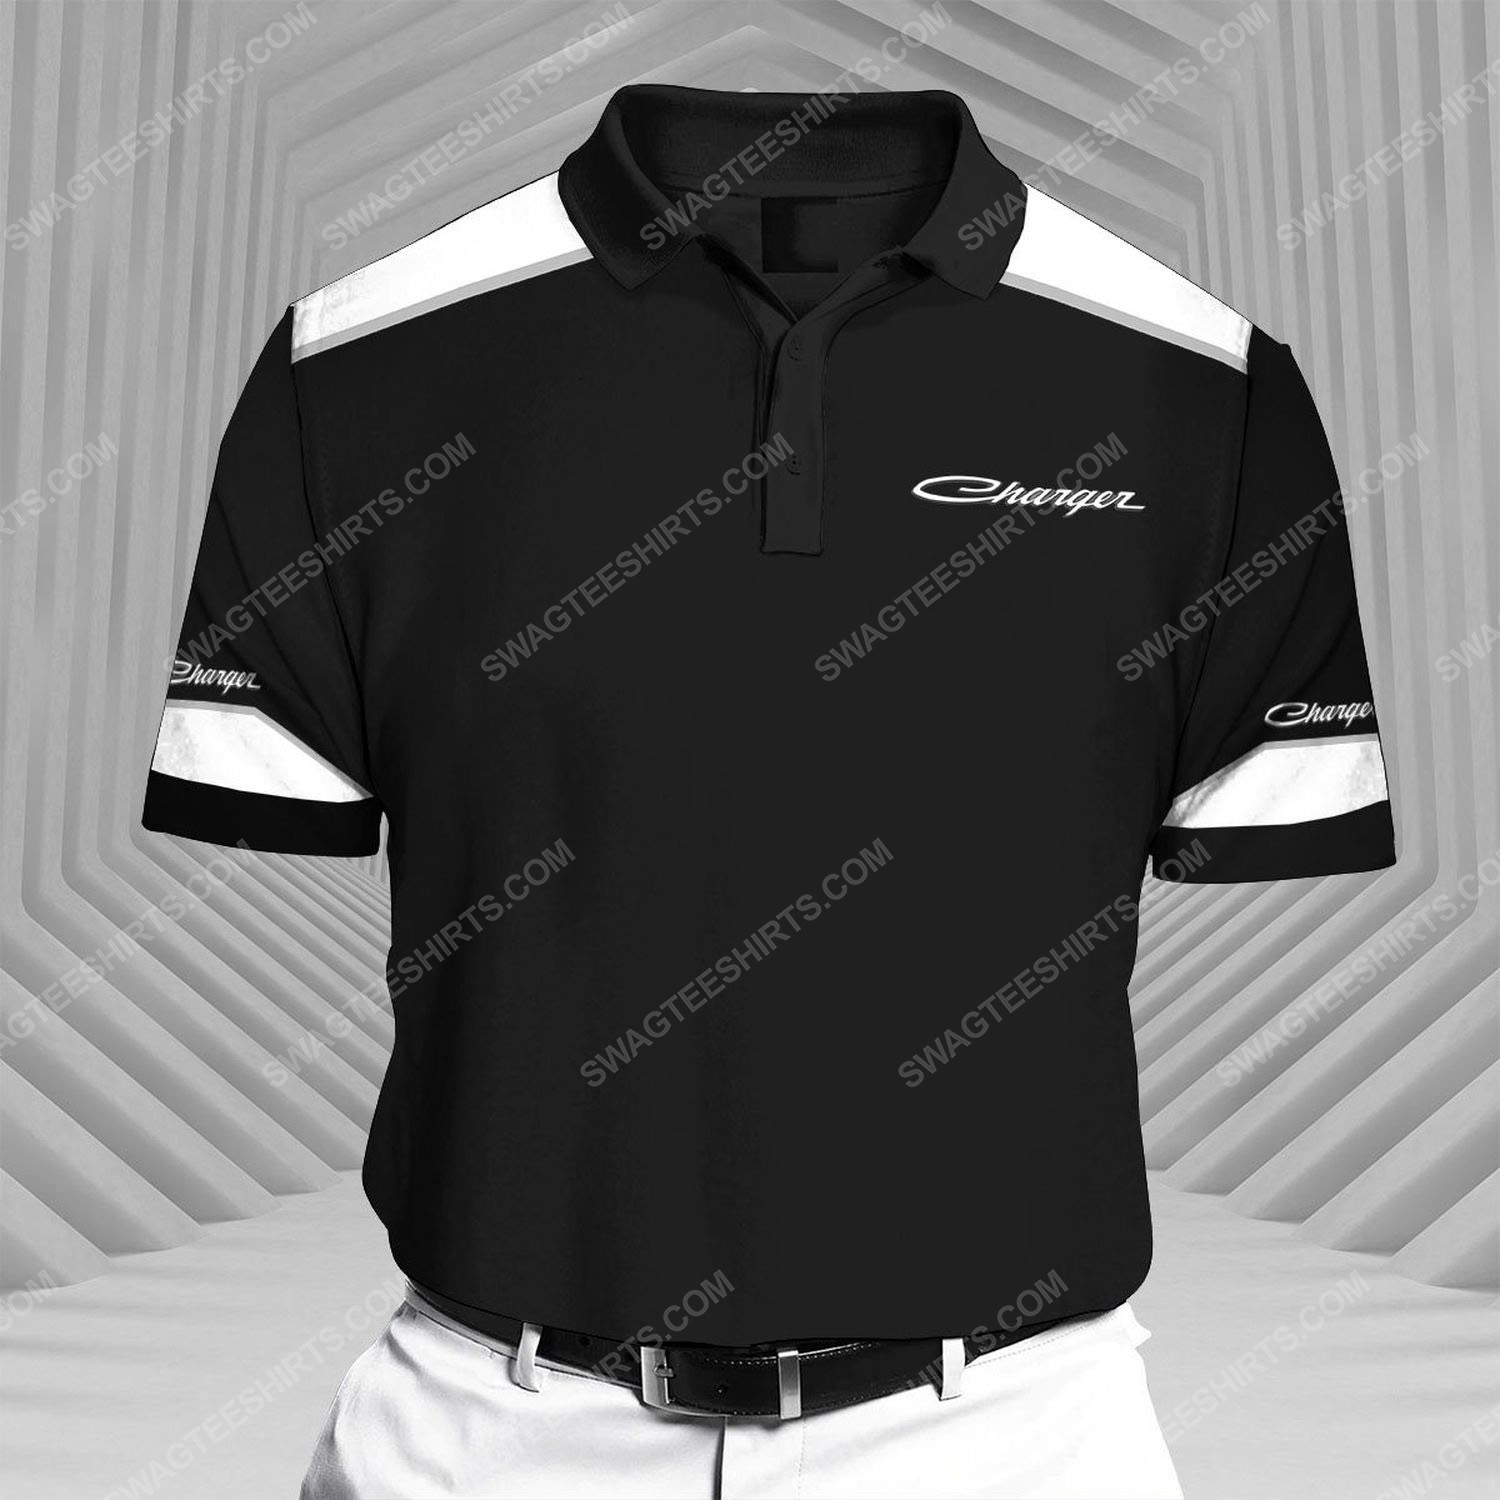 Dodge charger sports car all over print polo shirt